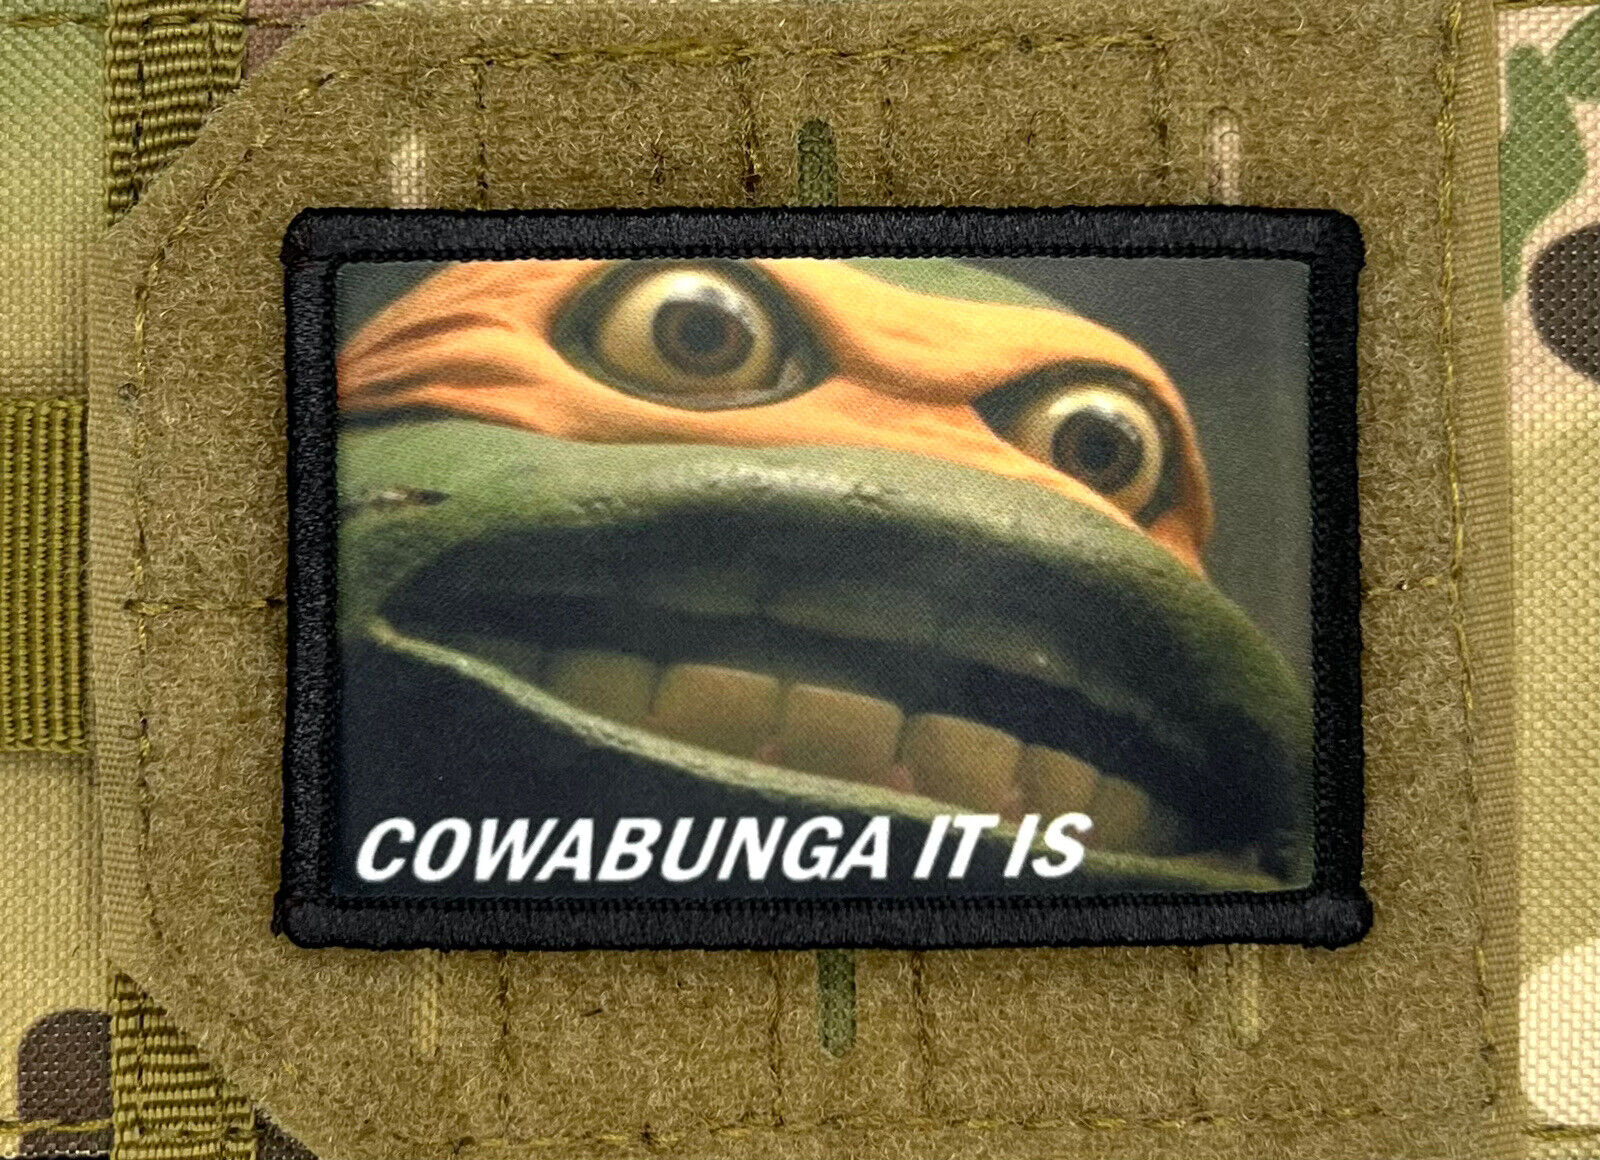 TMNT Michelangelo Cowabunga It Is Morale Patch / Military Badge Tactical 535